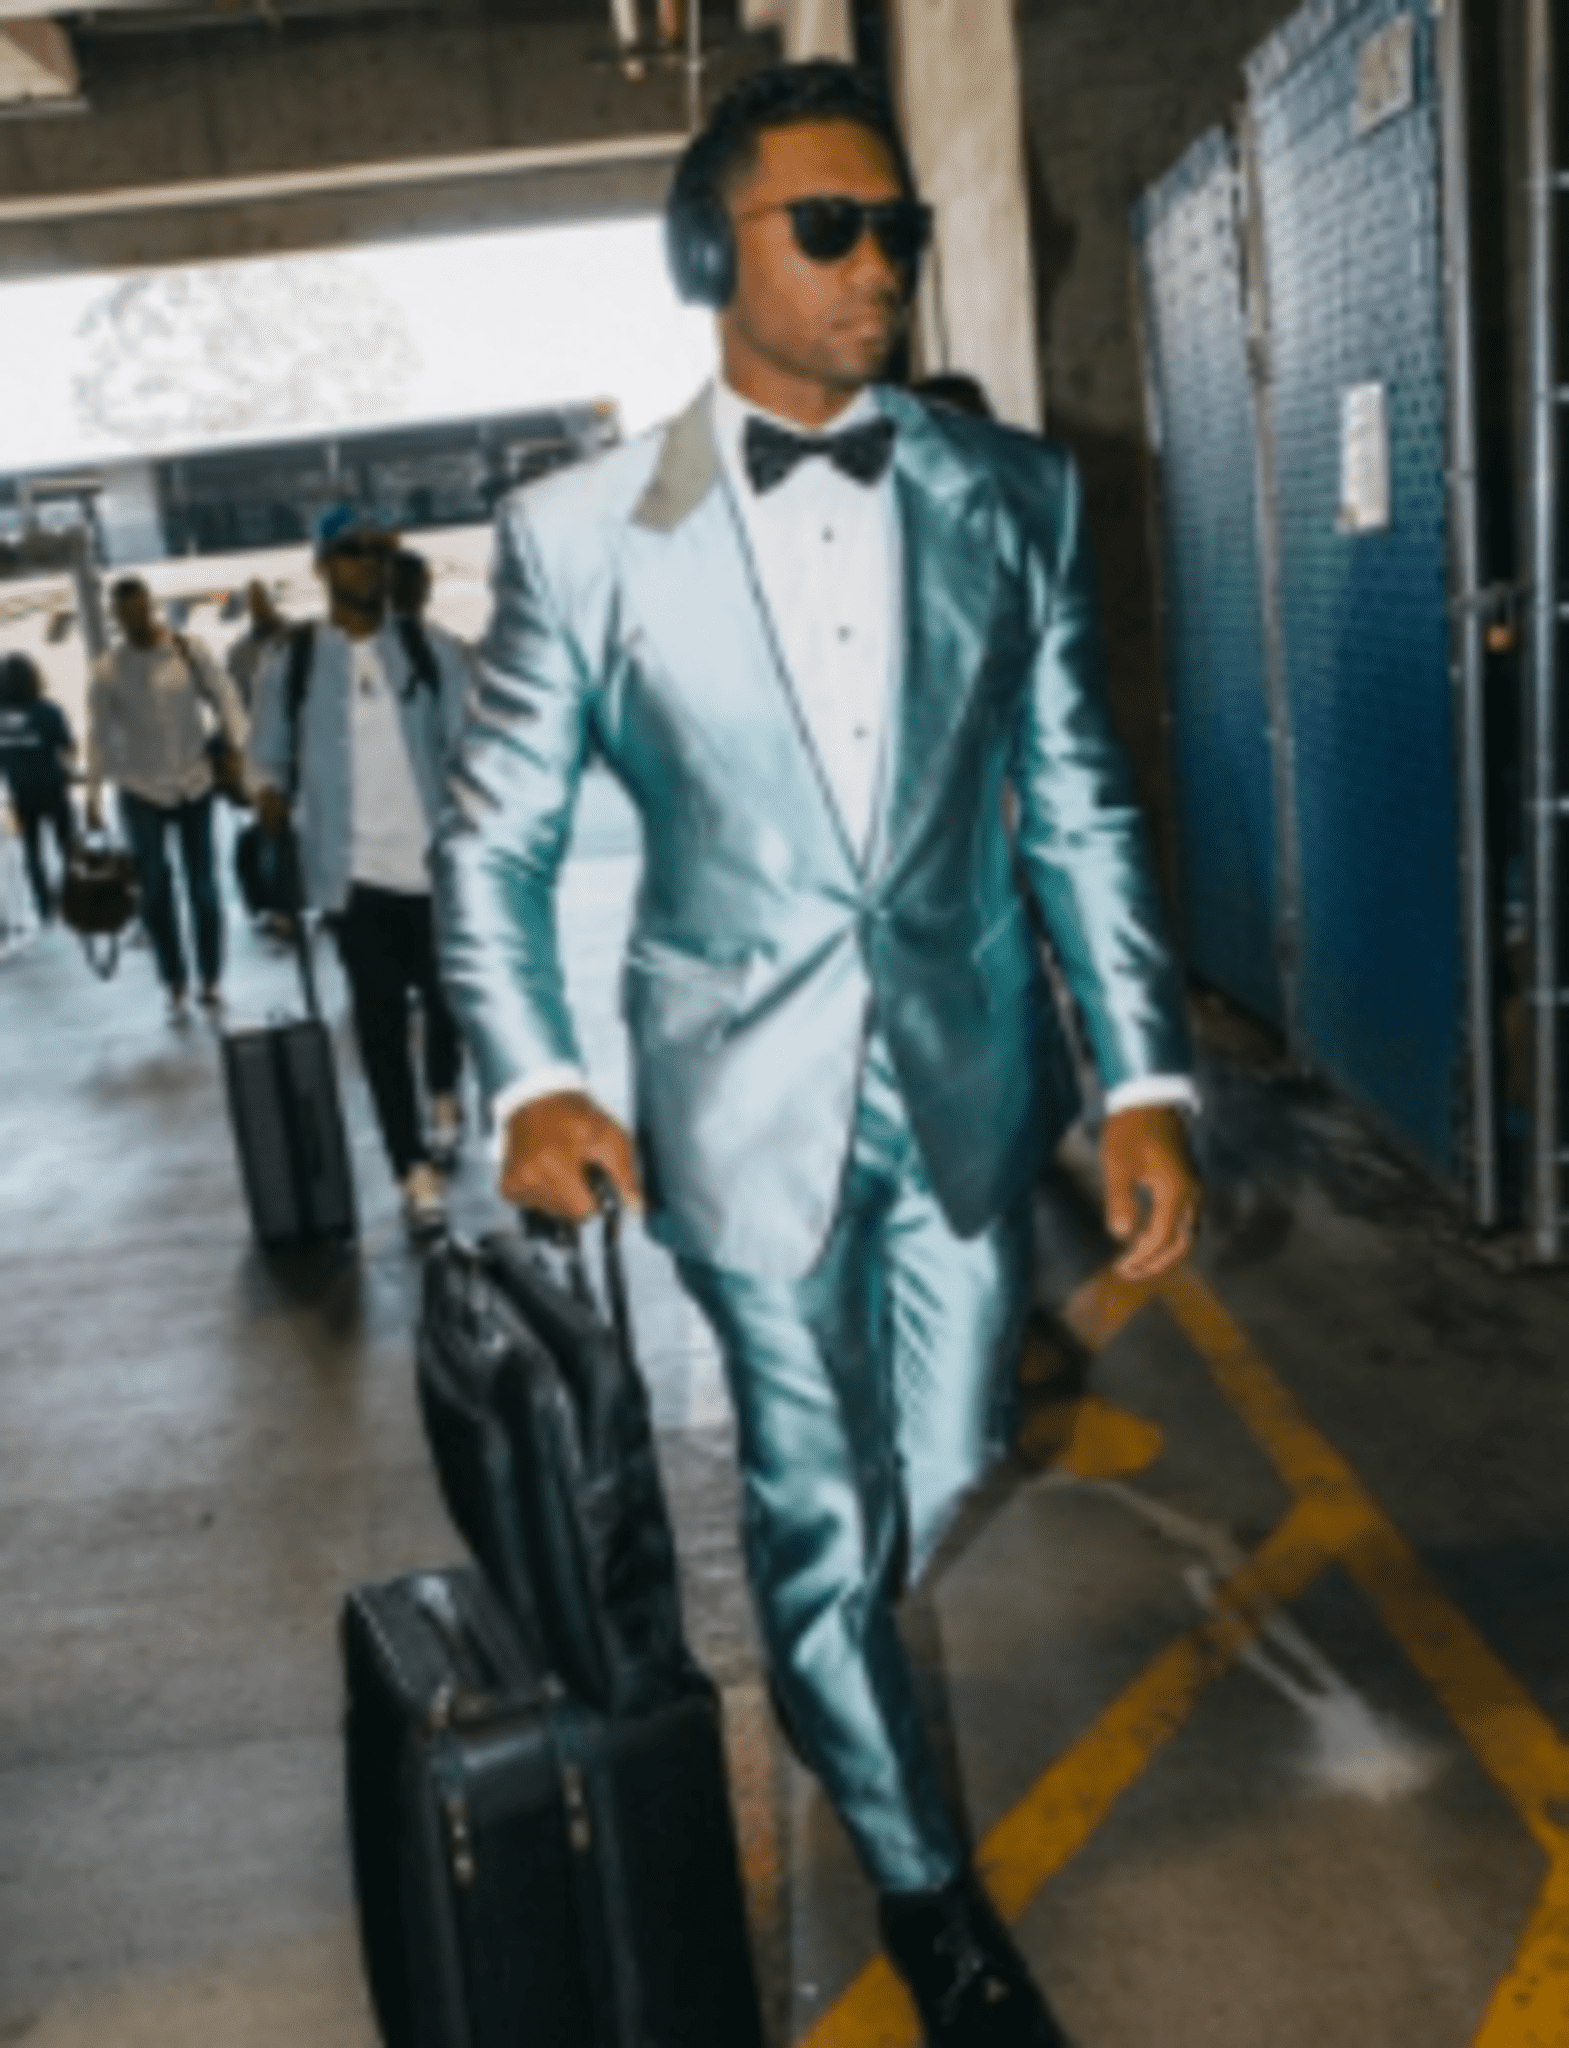 When Russell Wilson Wears This Metallic Suit, Fans Can't Look Away